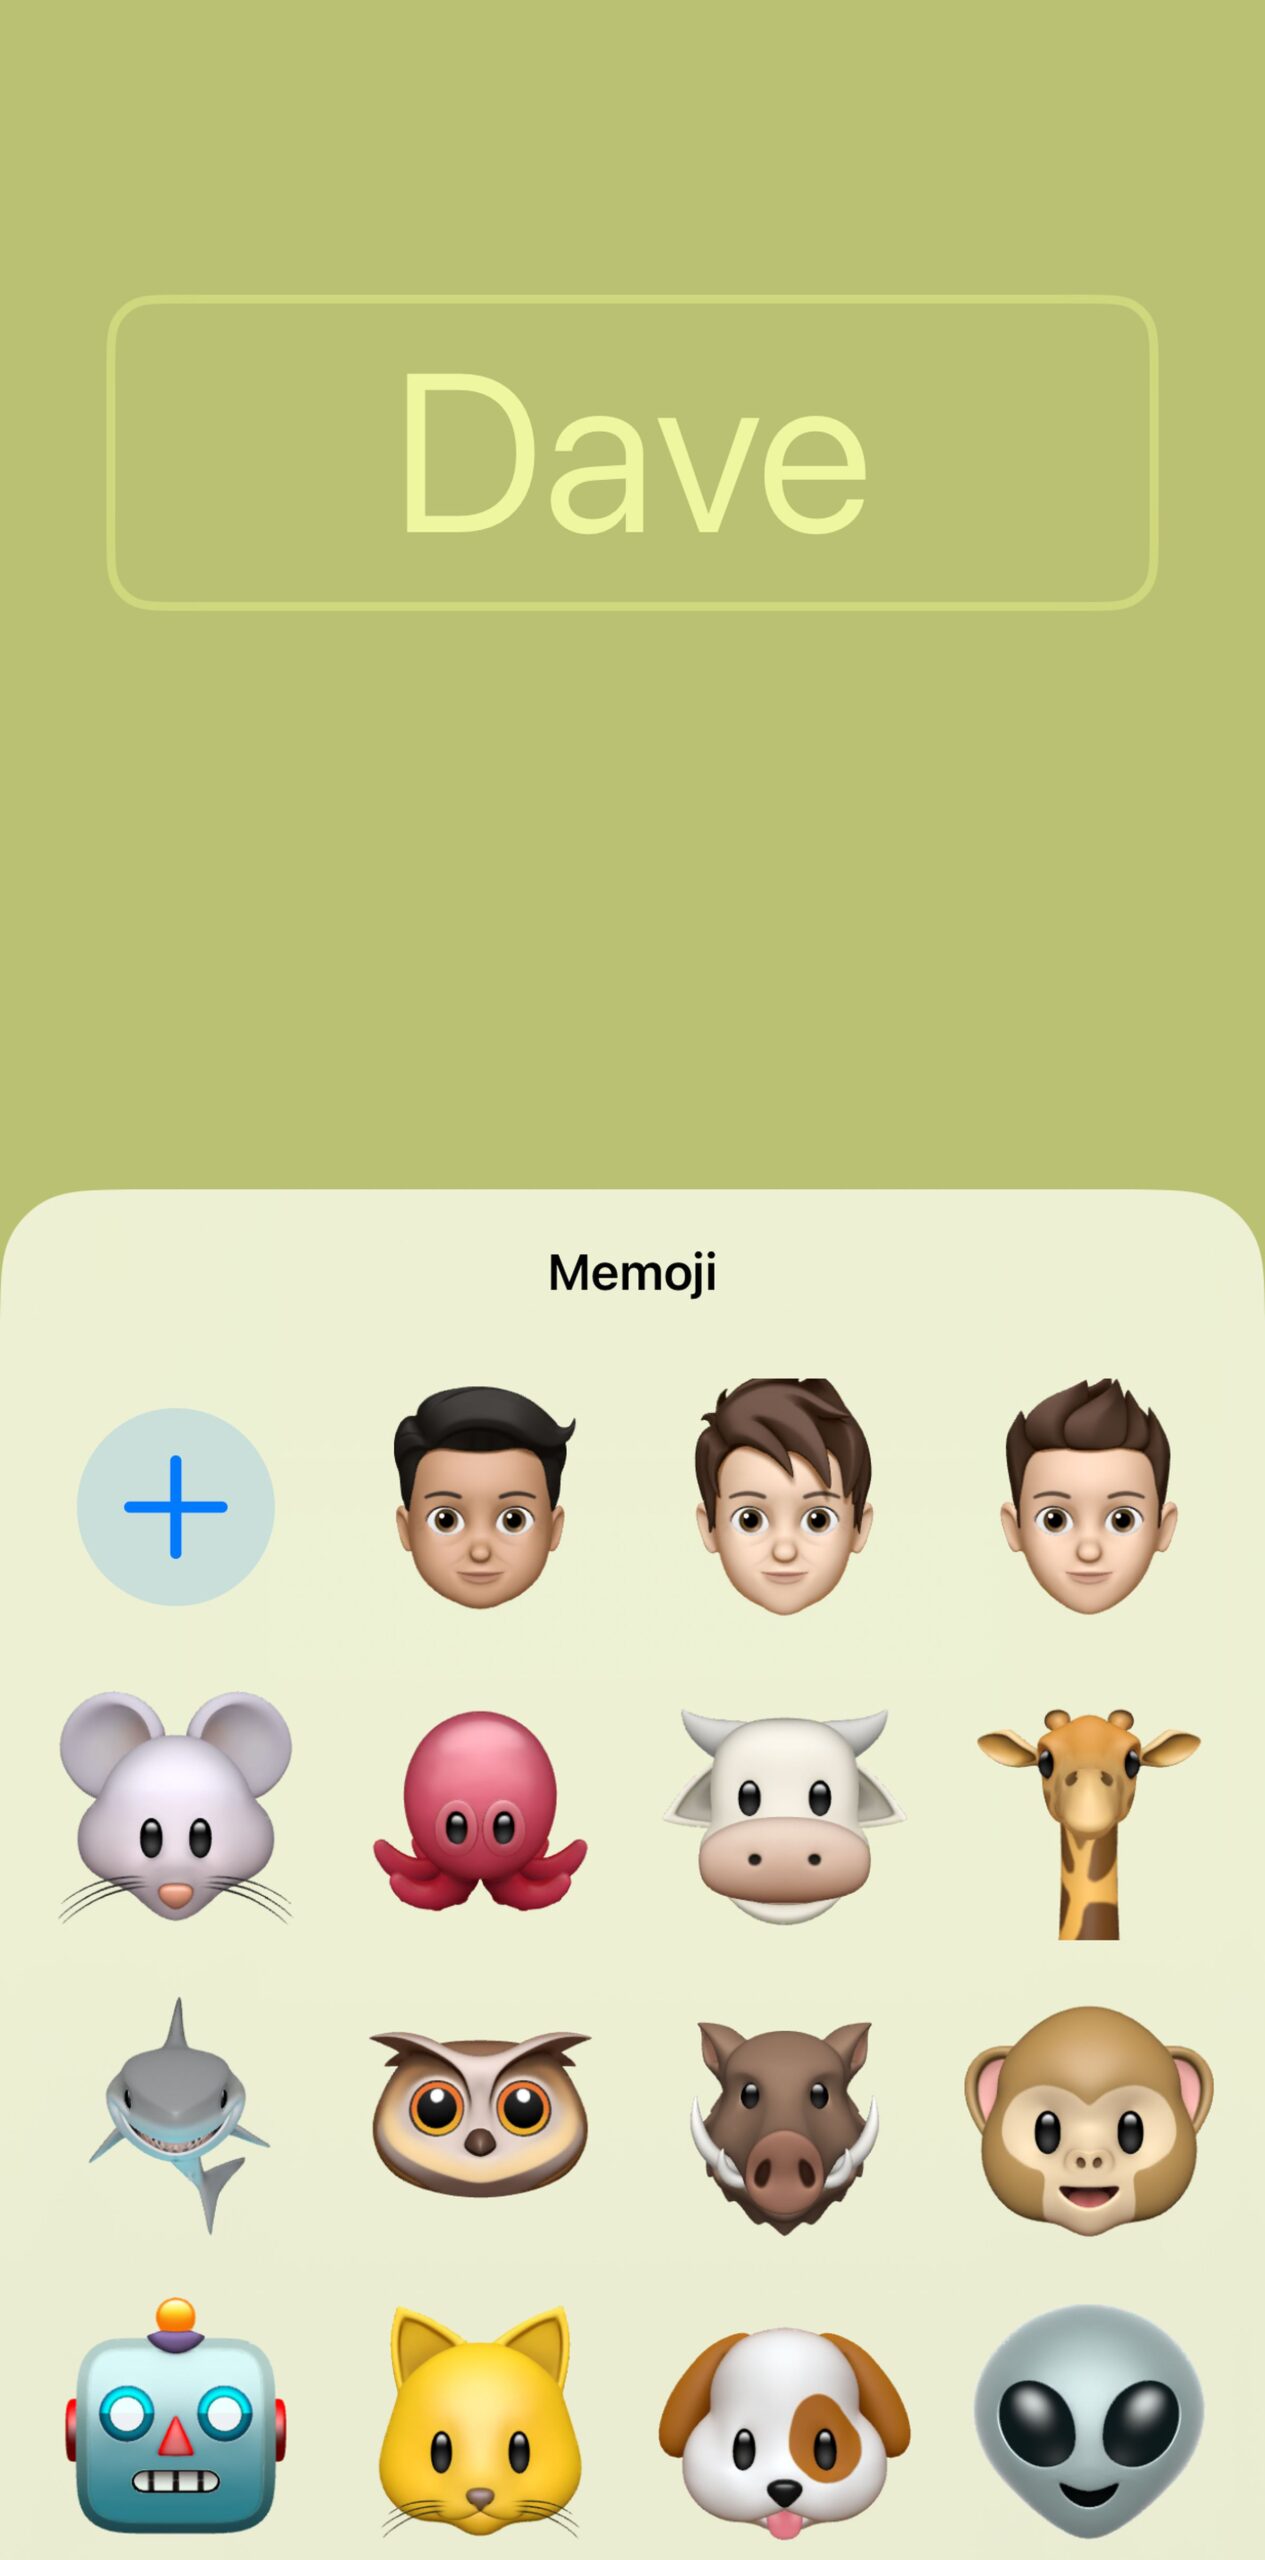 Screen with the word Dave on top, and various different Memoji images on the bottom half.